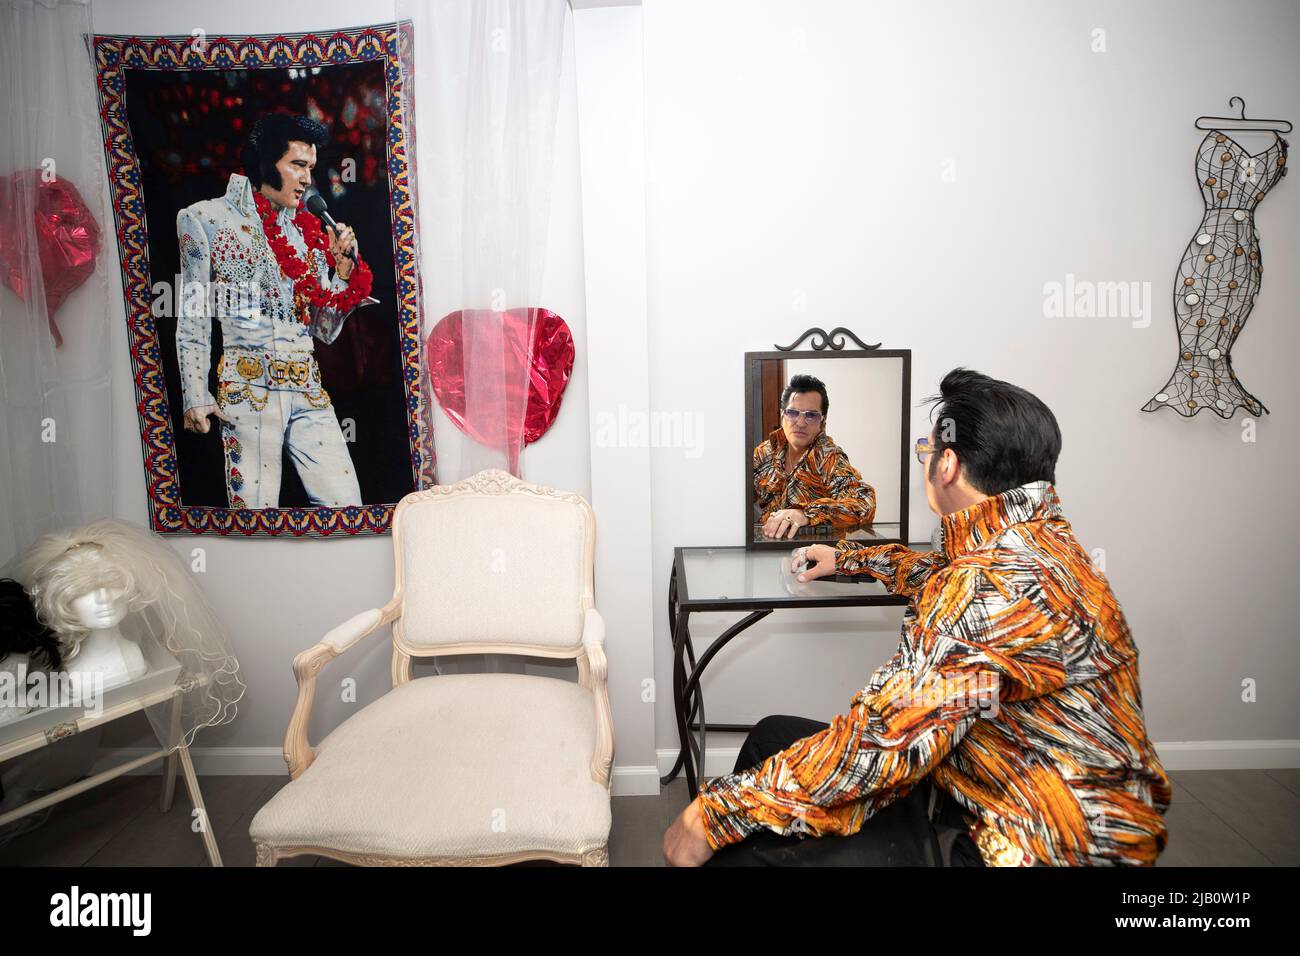 Elvis Presley tribute artist Jesse Garon poses in front of a mirror after a marriage vow renewal ceremony at Little Chapel of Hearts in Las Vegas, Nevada, U.S. June 1, 2022.  REUTERS/Steve Marcus Stock Photo